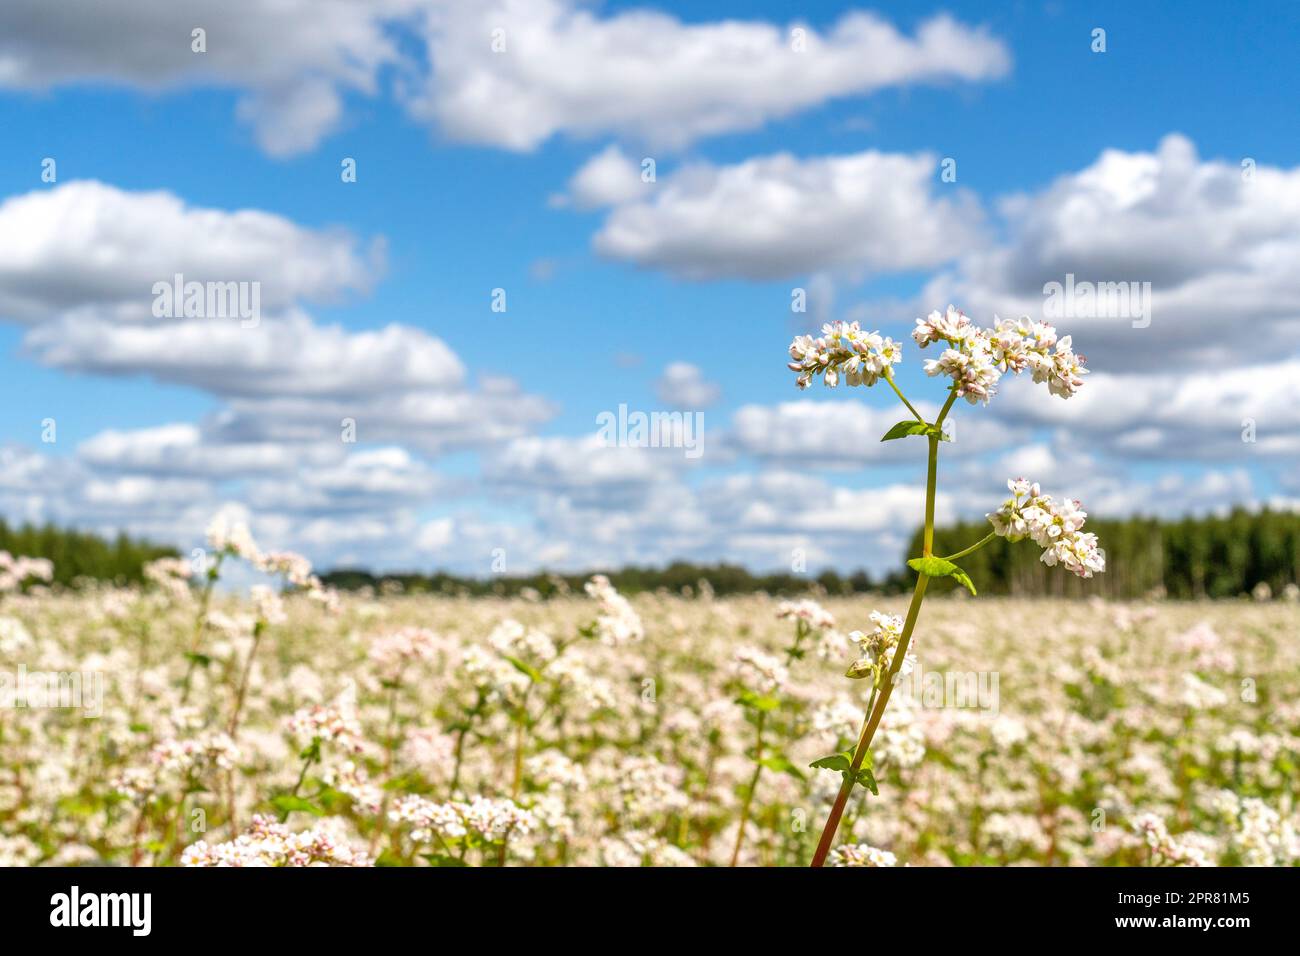 View on a blooming buckwheat field with white flowers Stock Photo